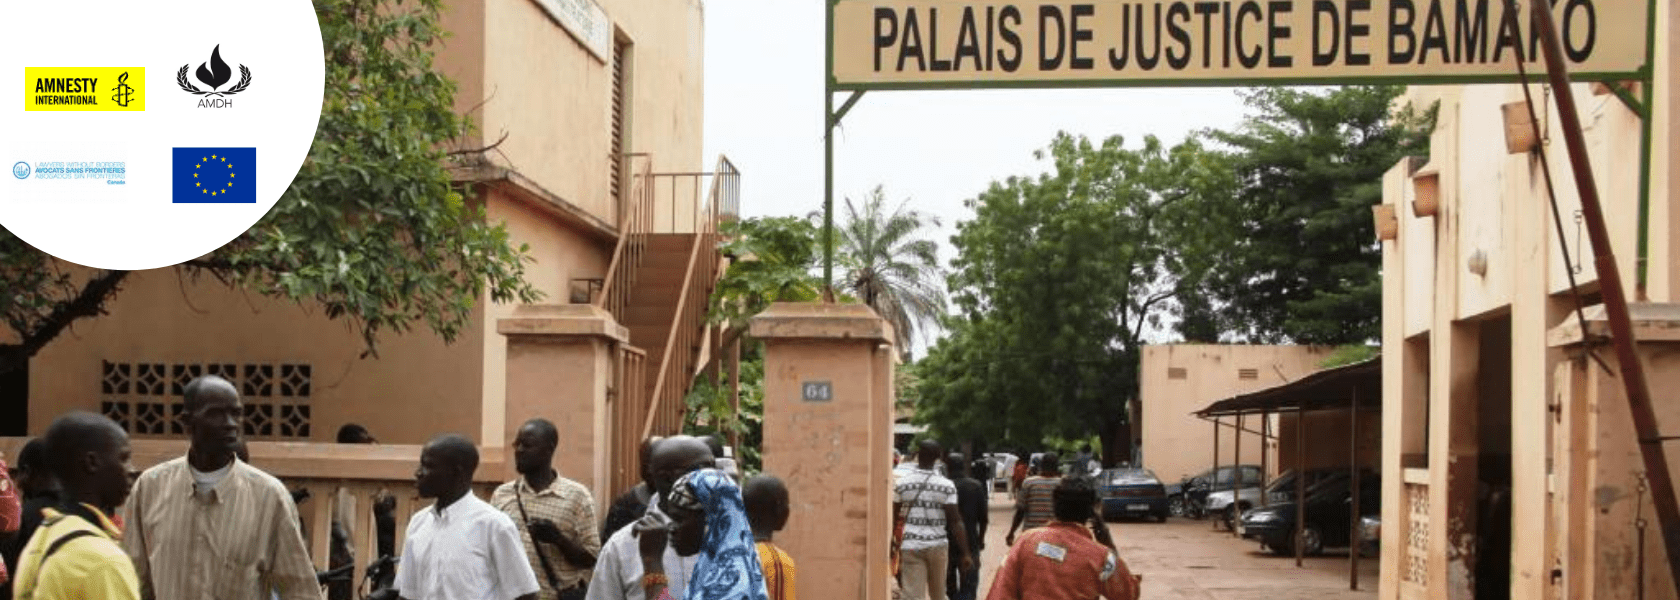 Mali: New project makes the fight against impunity a priority